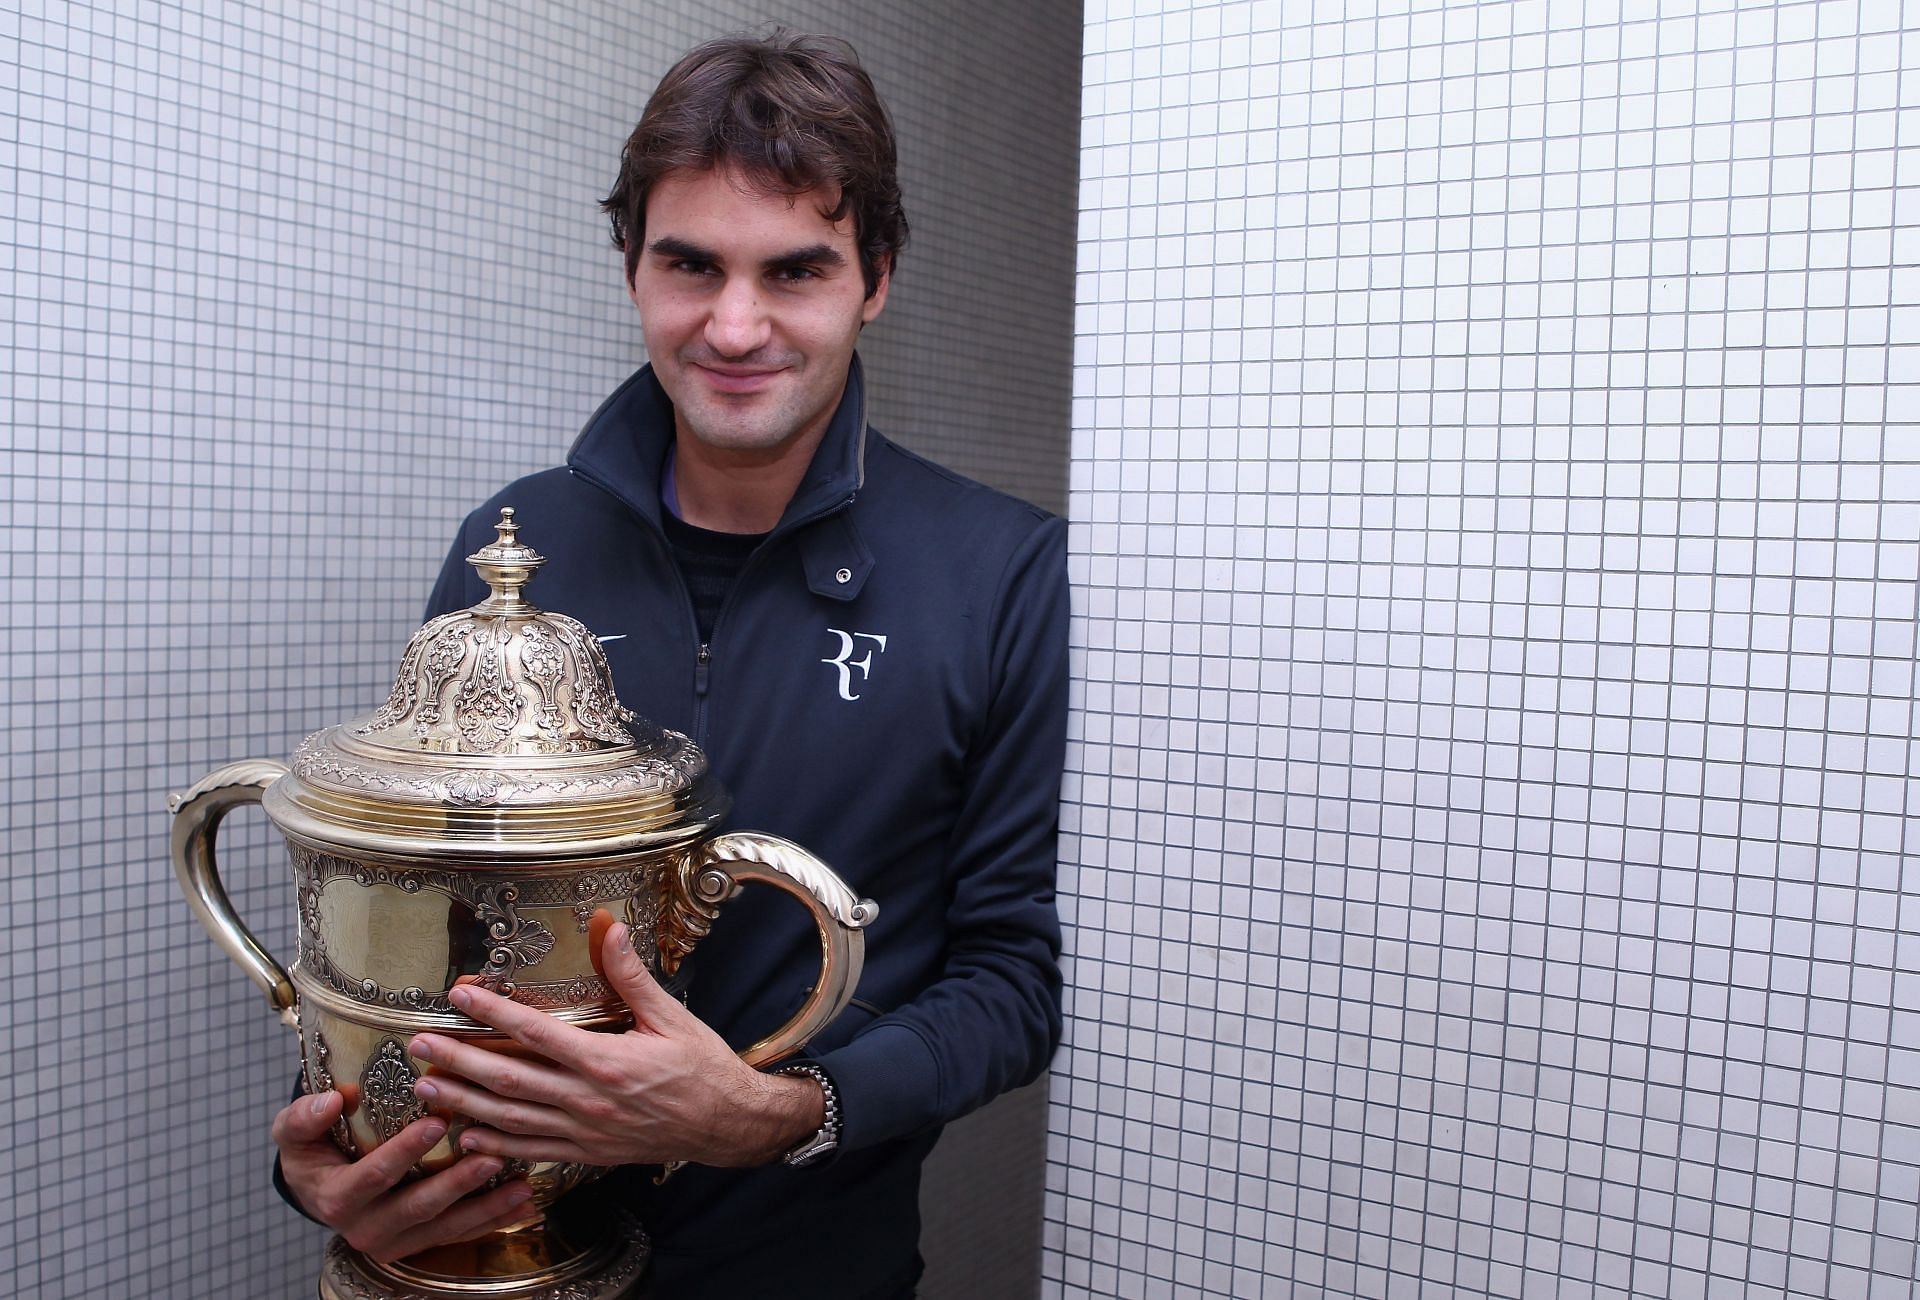 Roger Federer has reached the final 10 times at least in five different tournaments till date